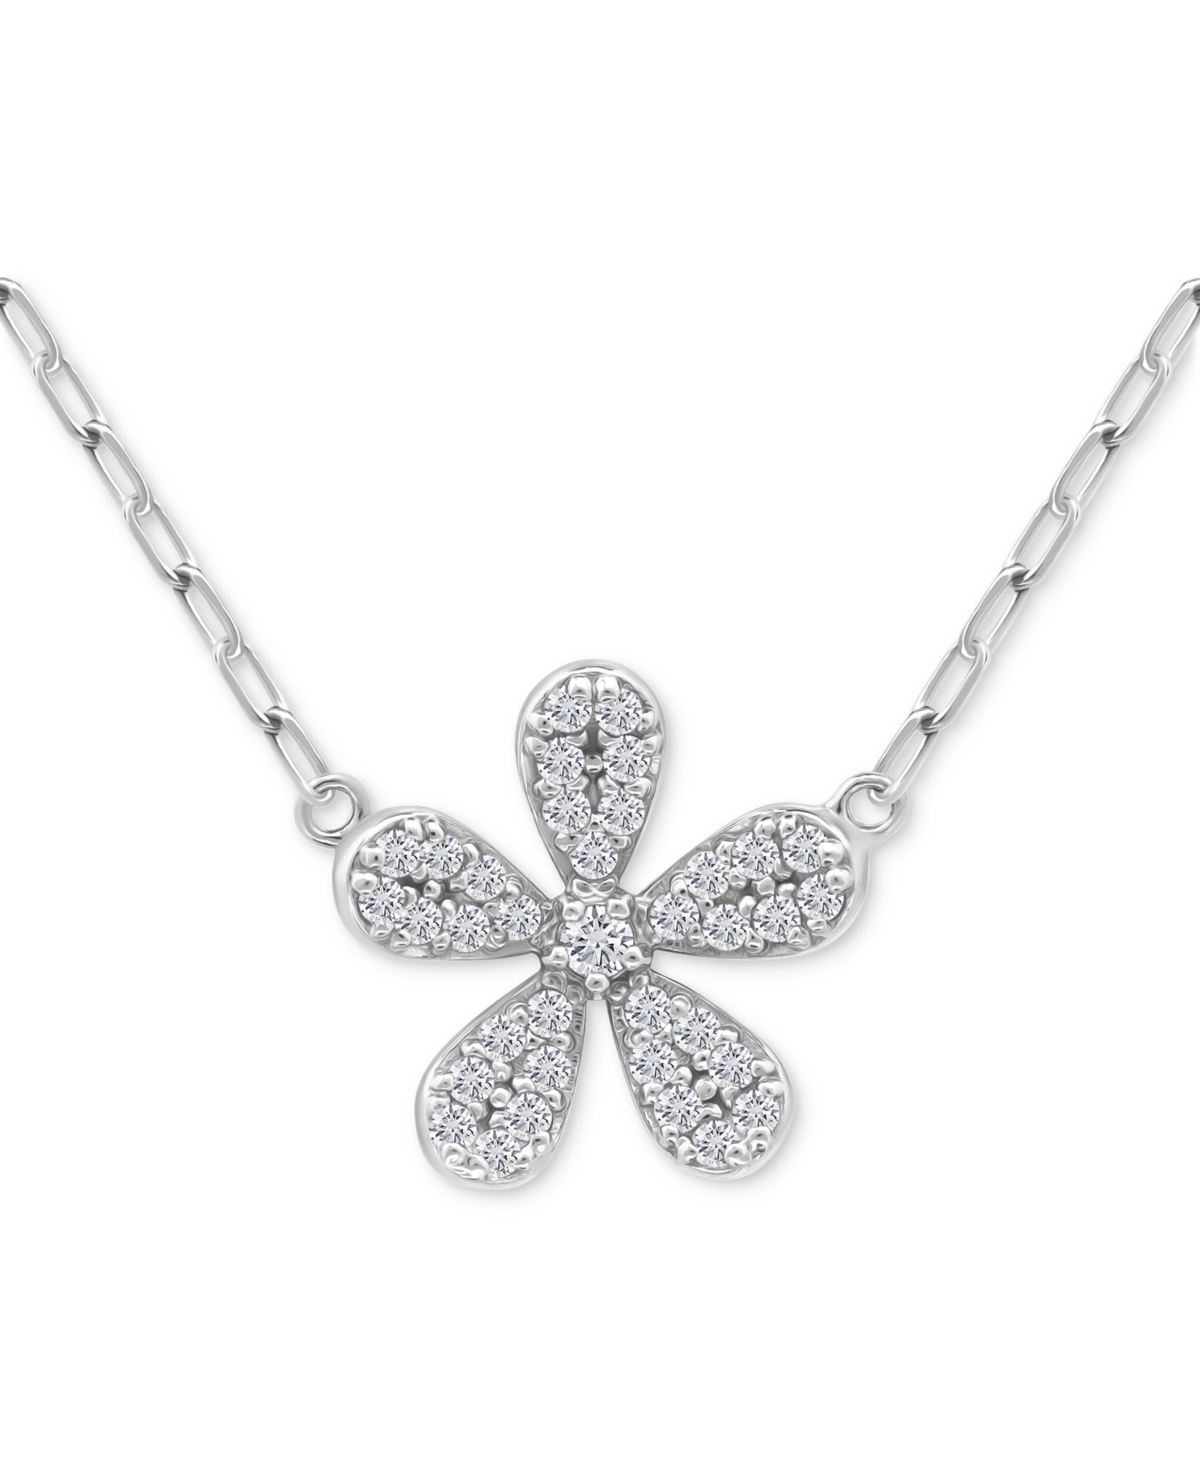 Giani Bernini Cubic Zirconia Pave Flower Pendant Necklace In Sterling Silver, 16" + 2" Extender, Created For Macy'